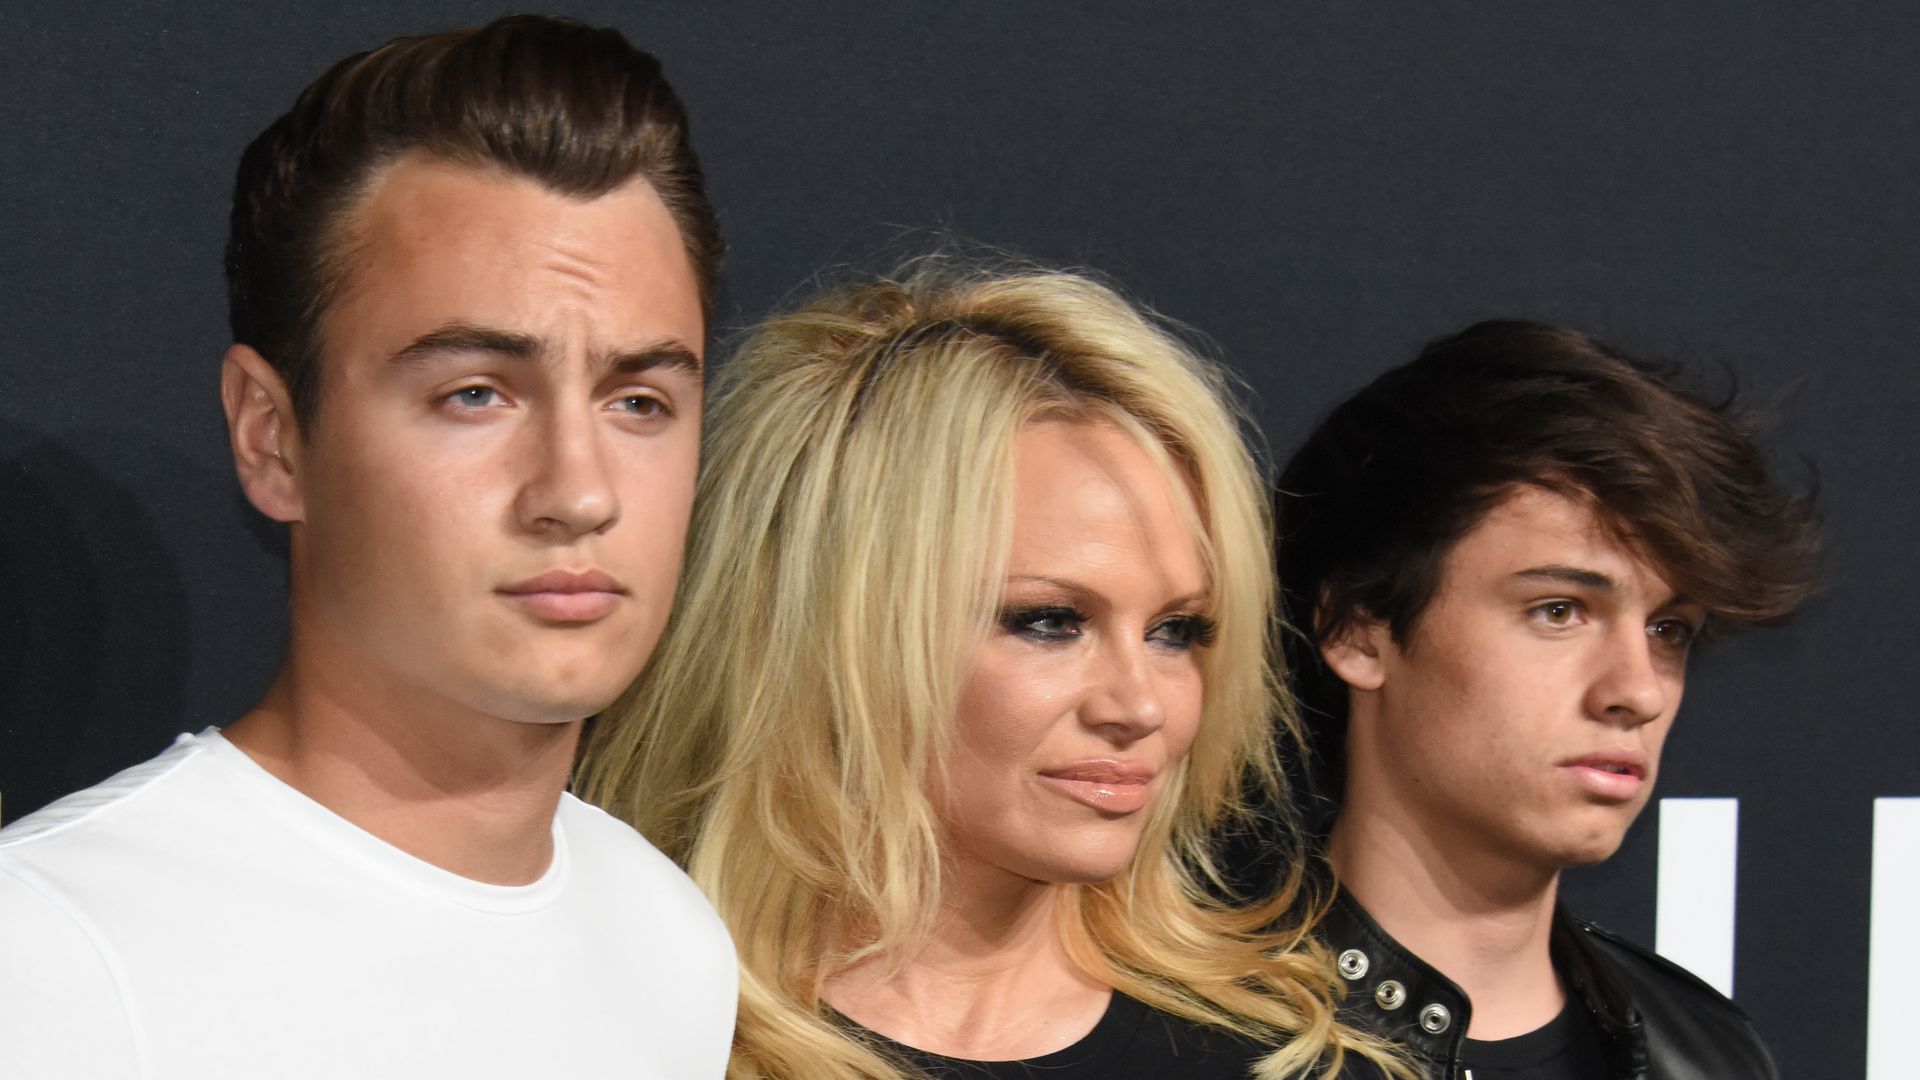 Brandon Thomas standing with Pamela Anderson and Dylan Jagger